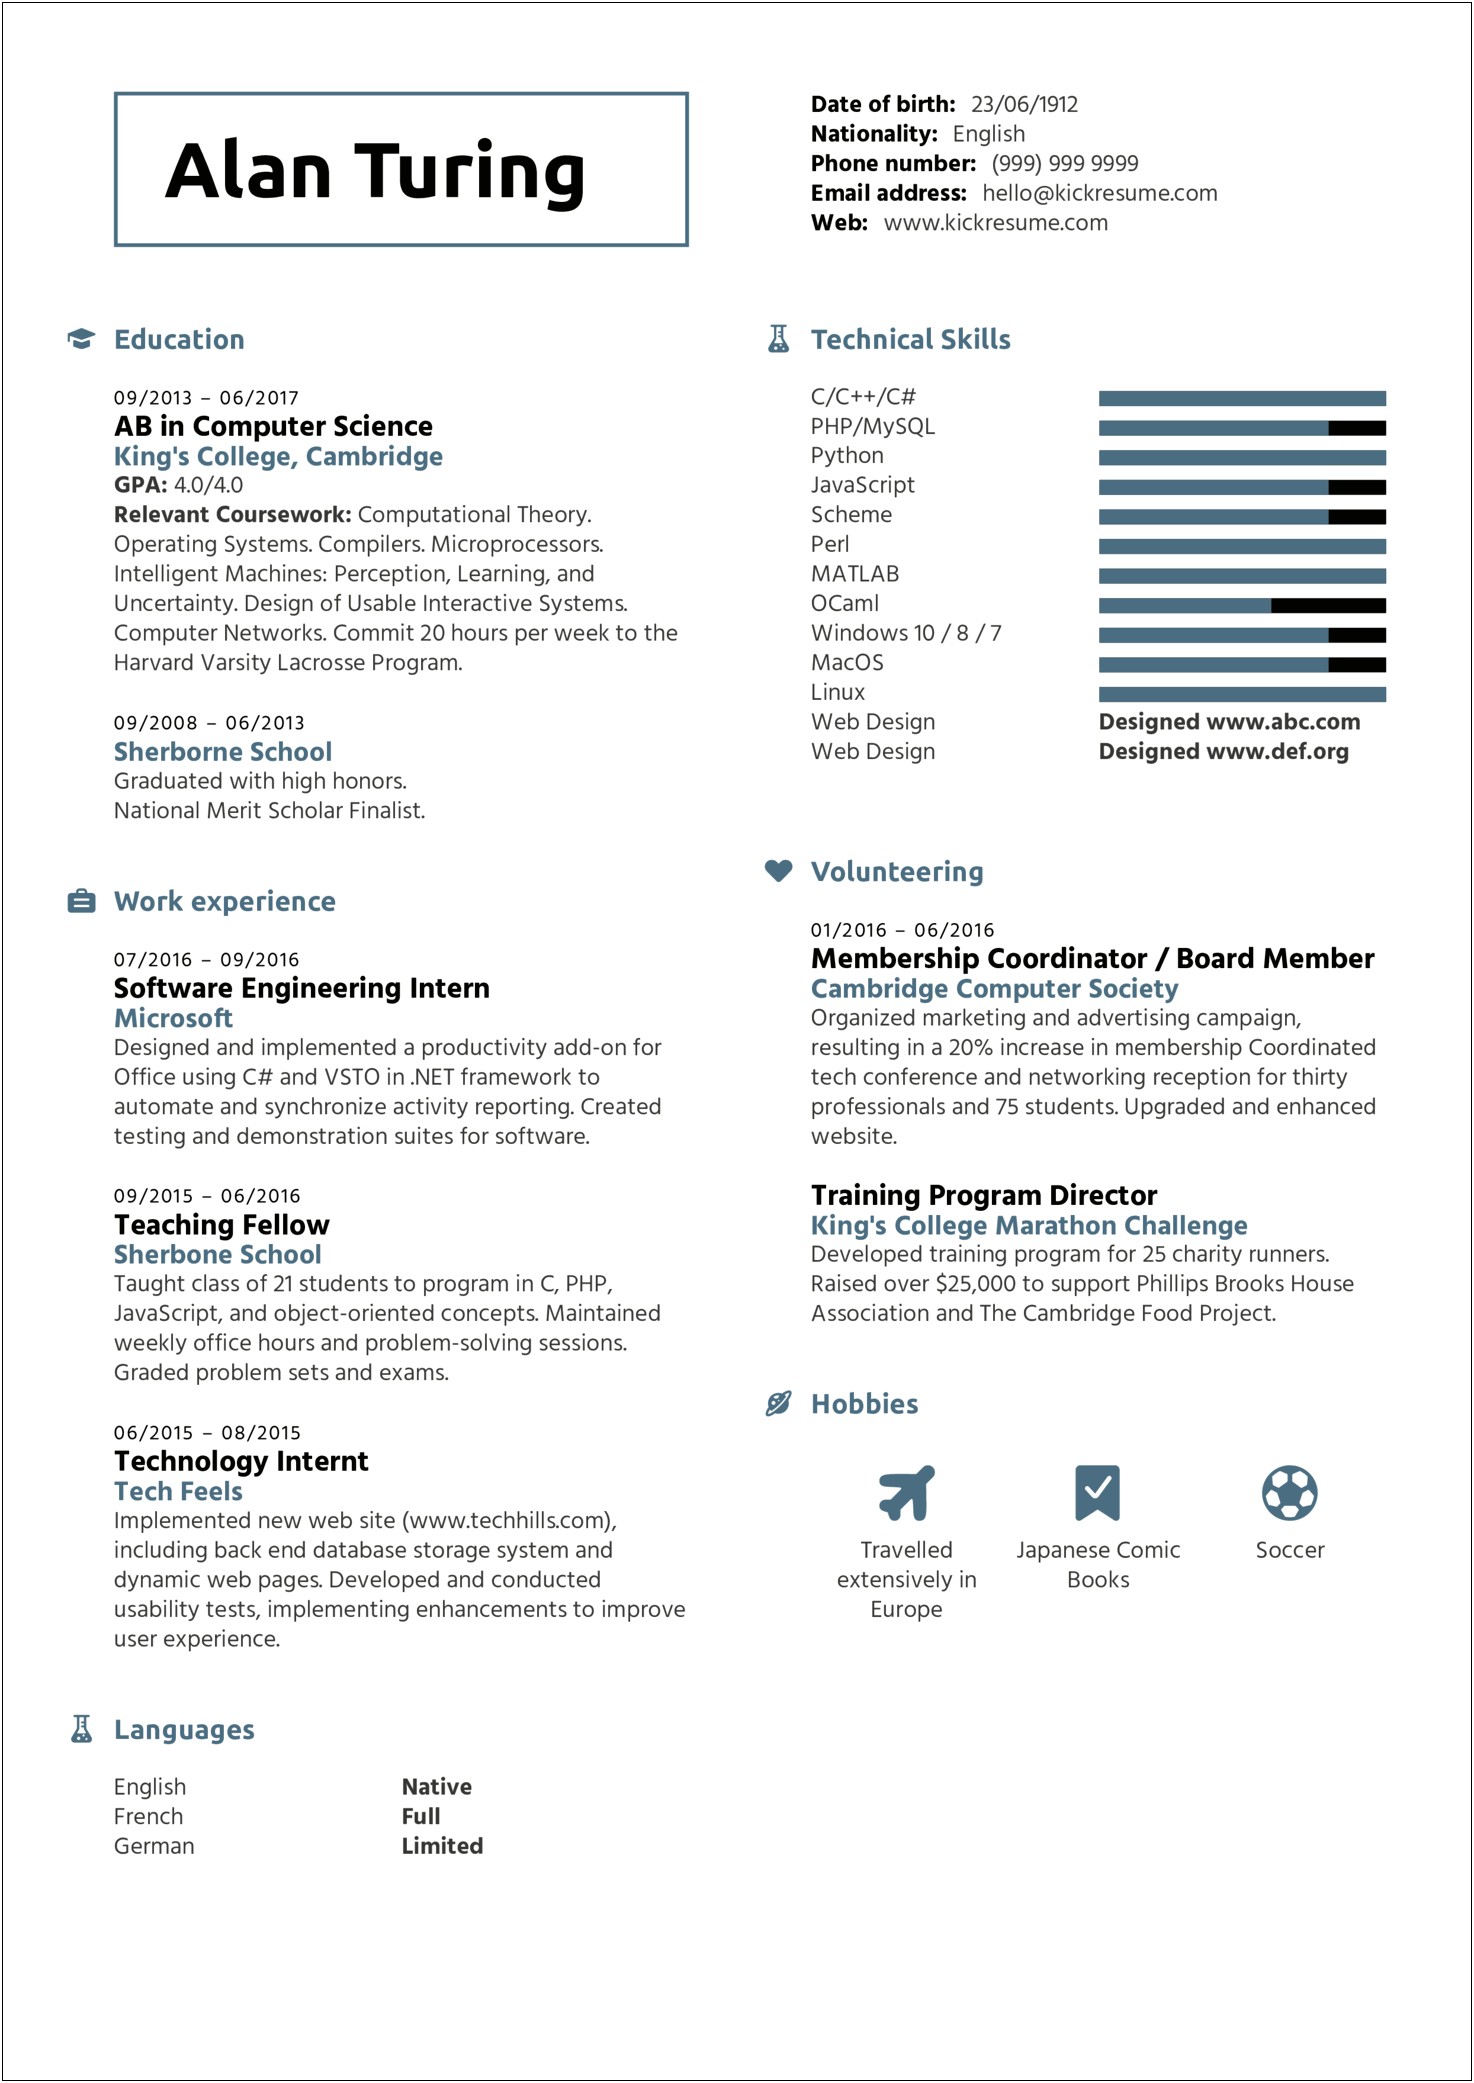 Resume Summary For Going Back Into Tech